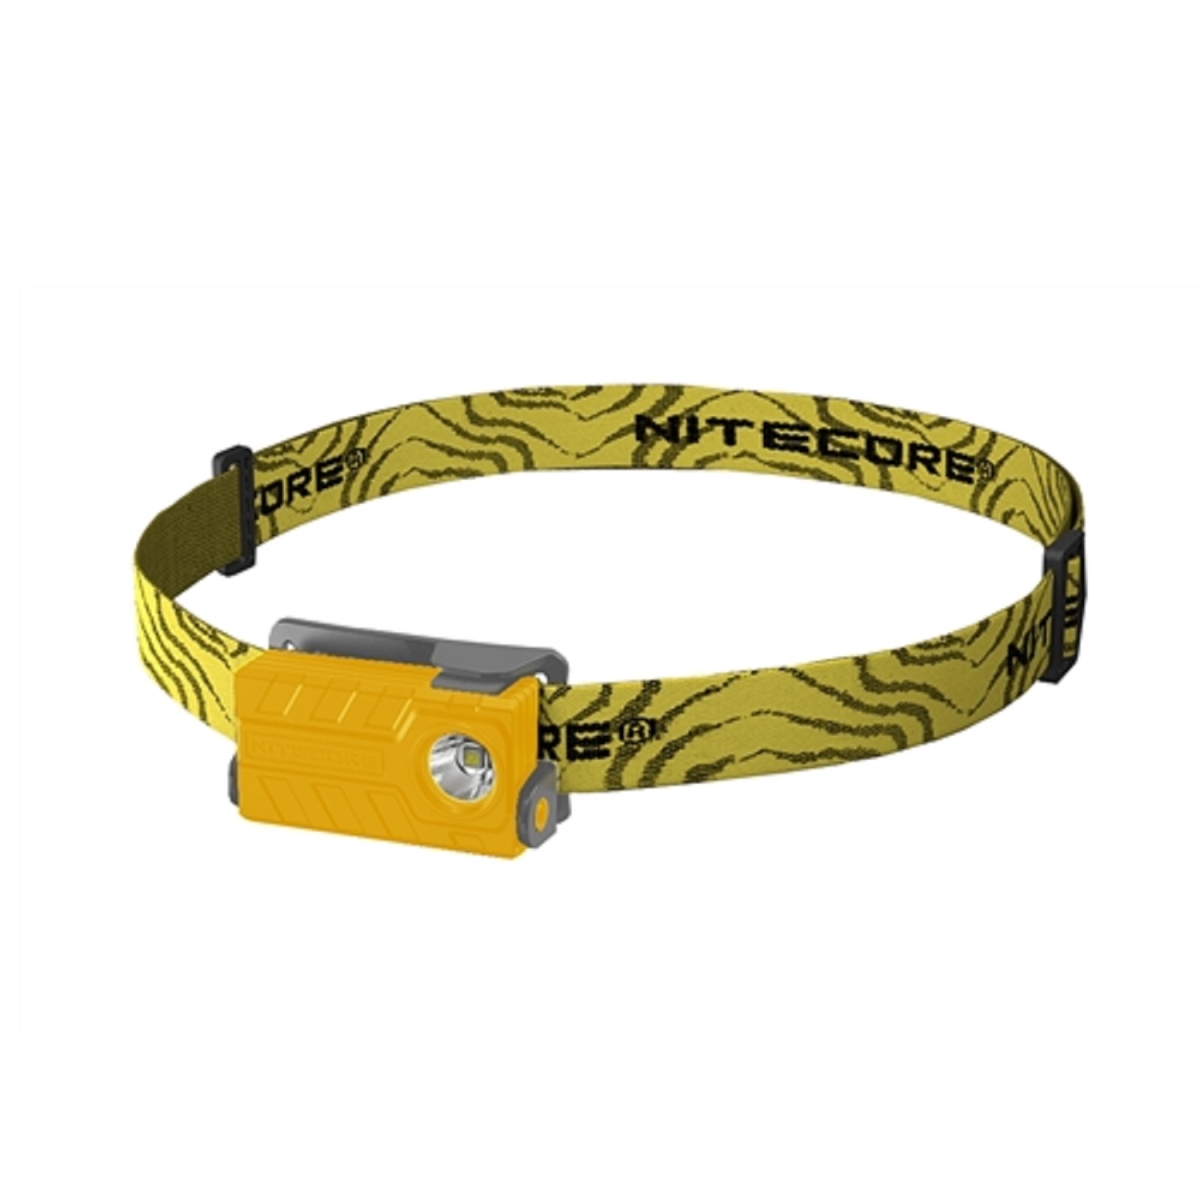 Nitecore Sysmax Industrial 9004725 360 Lumens Usb Rechargeable Lightweight Headlamp - Yellow